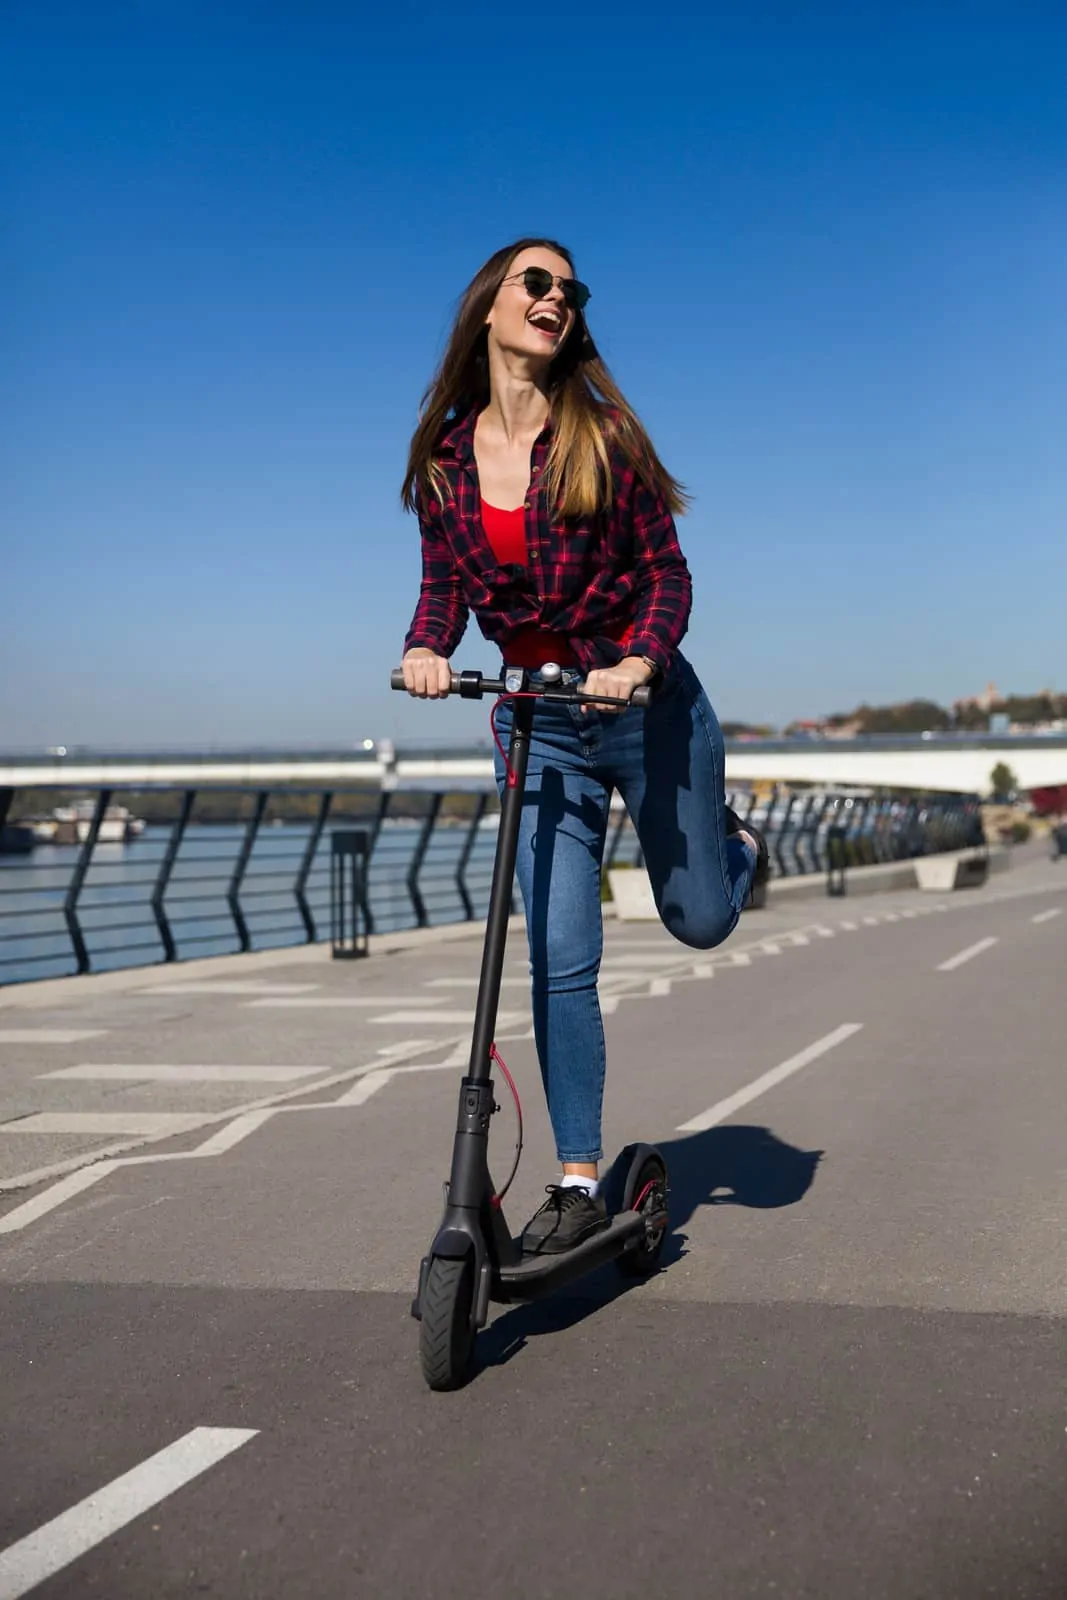 Best 5 Coolest Electric Scooters For Sale In 2020 Review - Smiling Riding on Electric Scooter